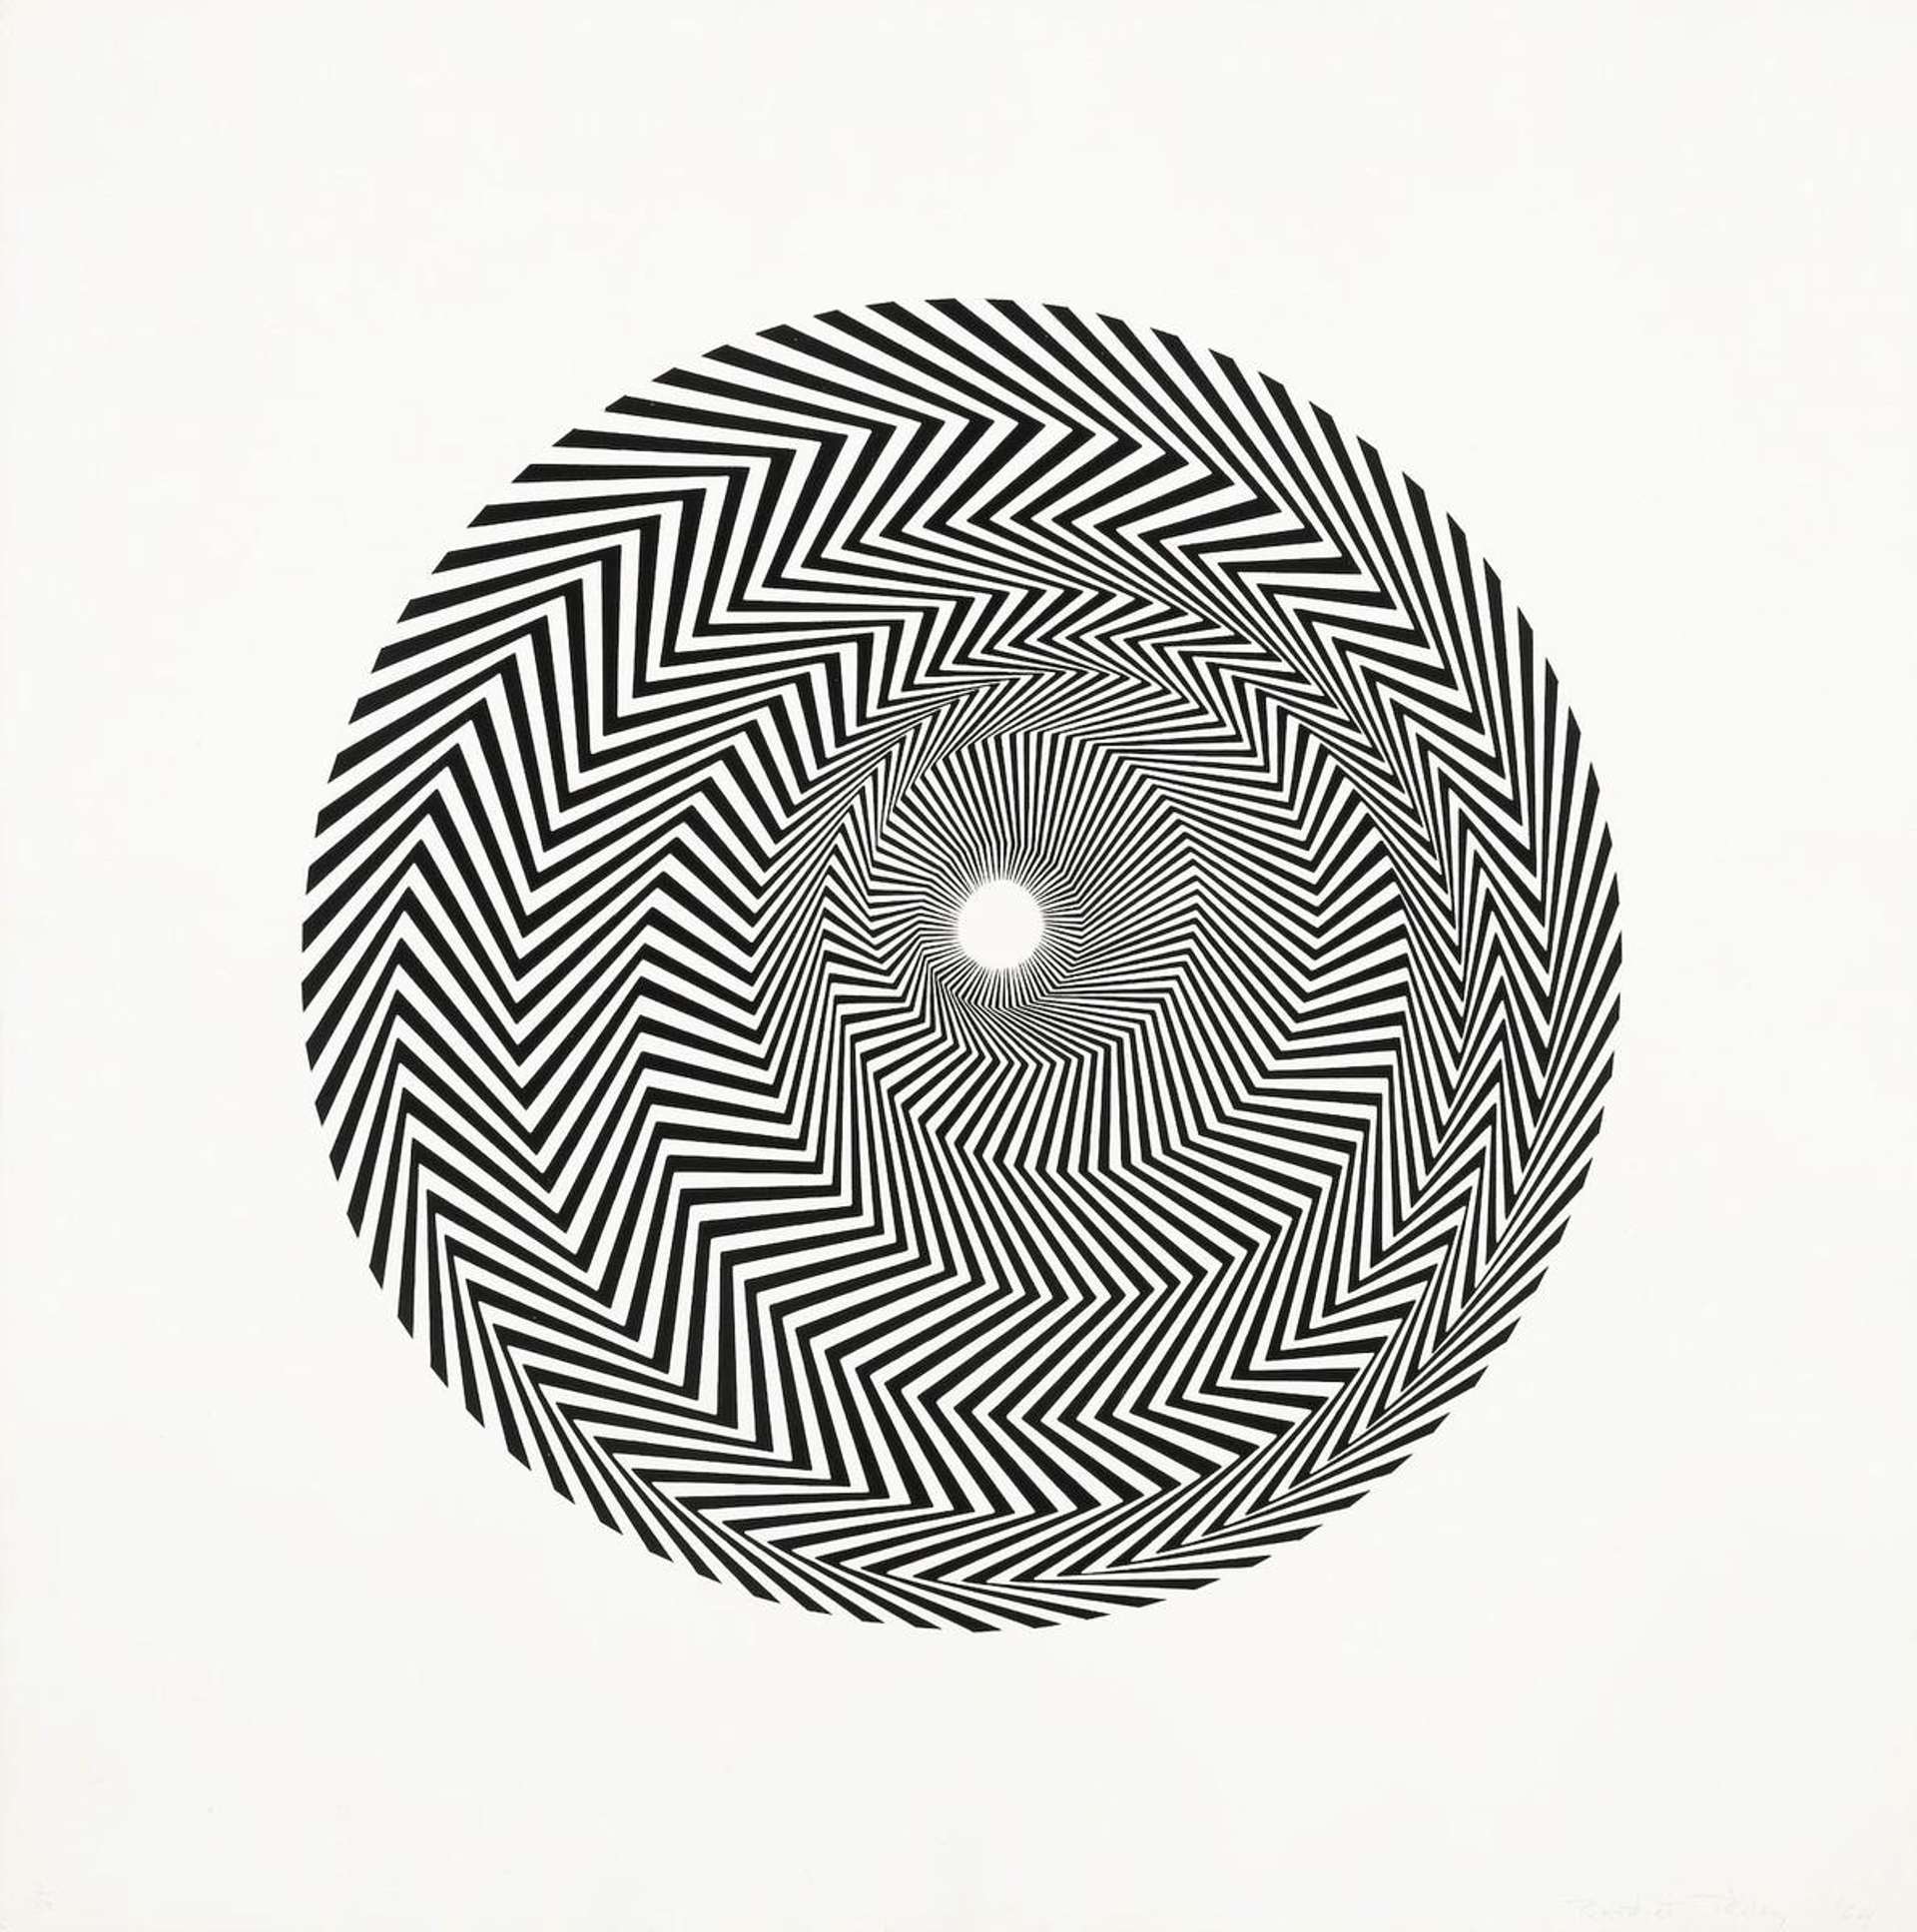 A monochrome succession of concentric circles, themselves composed of zig-zags. Where the ‘zigs’ of one circle meet the ‘zags’ of the next, chevrons form and the composition appears to rotate in opposing directions.